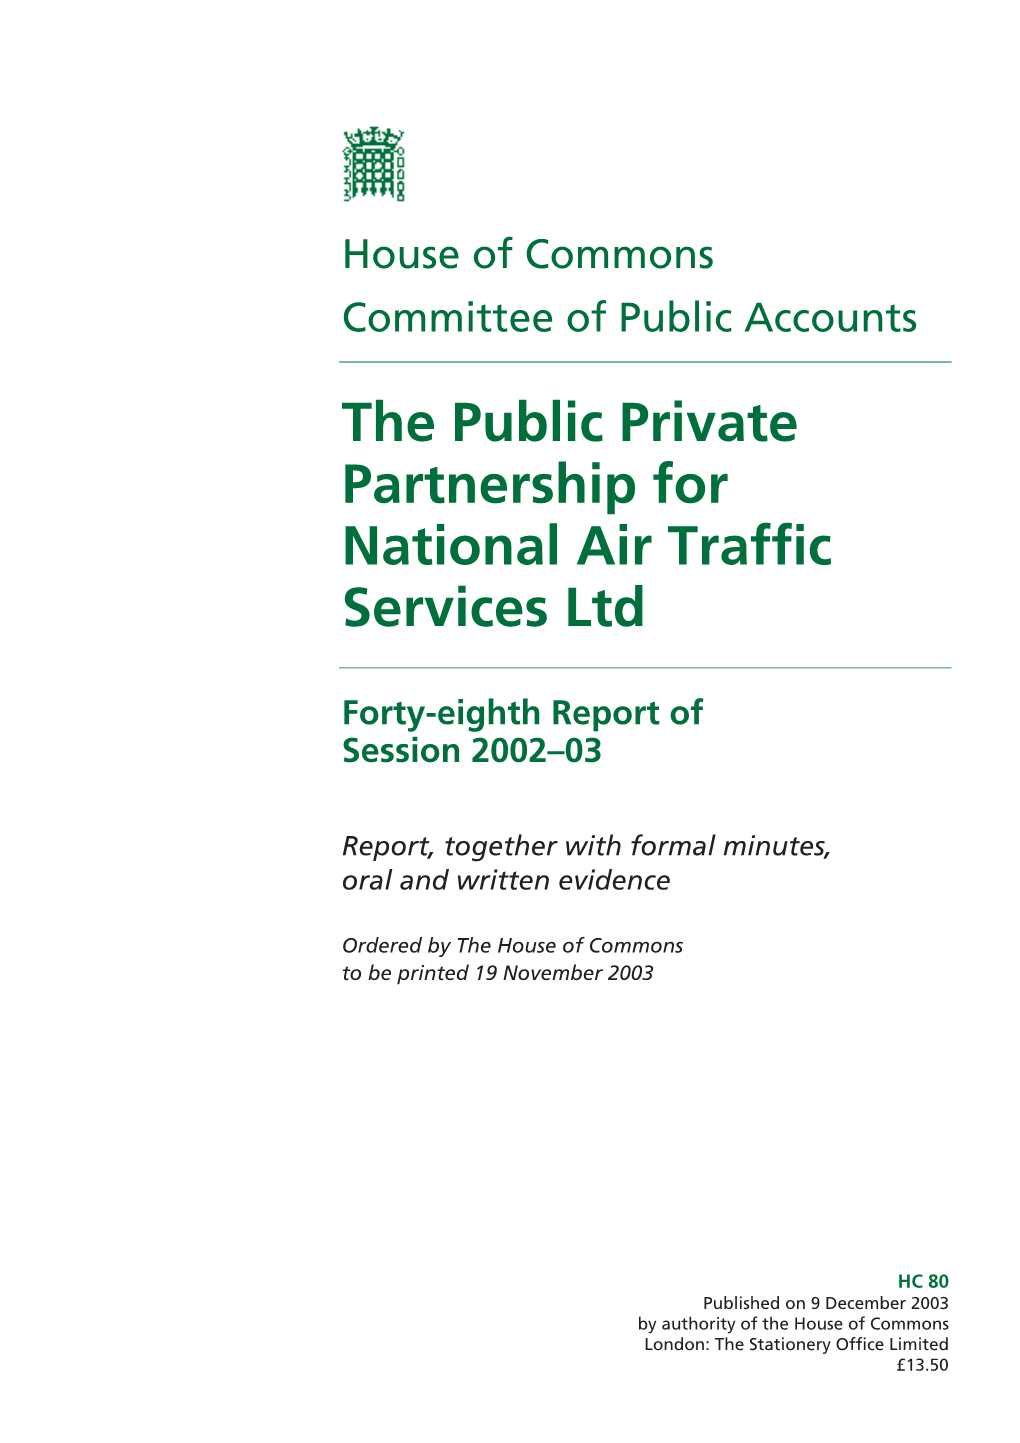 The Public Private Partnership for National Air Traffic Services Ltd